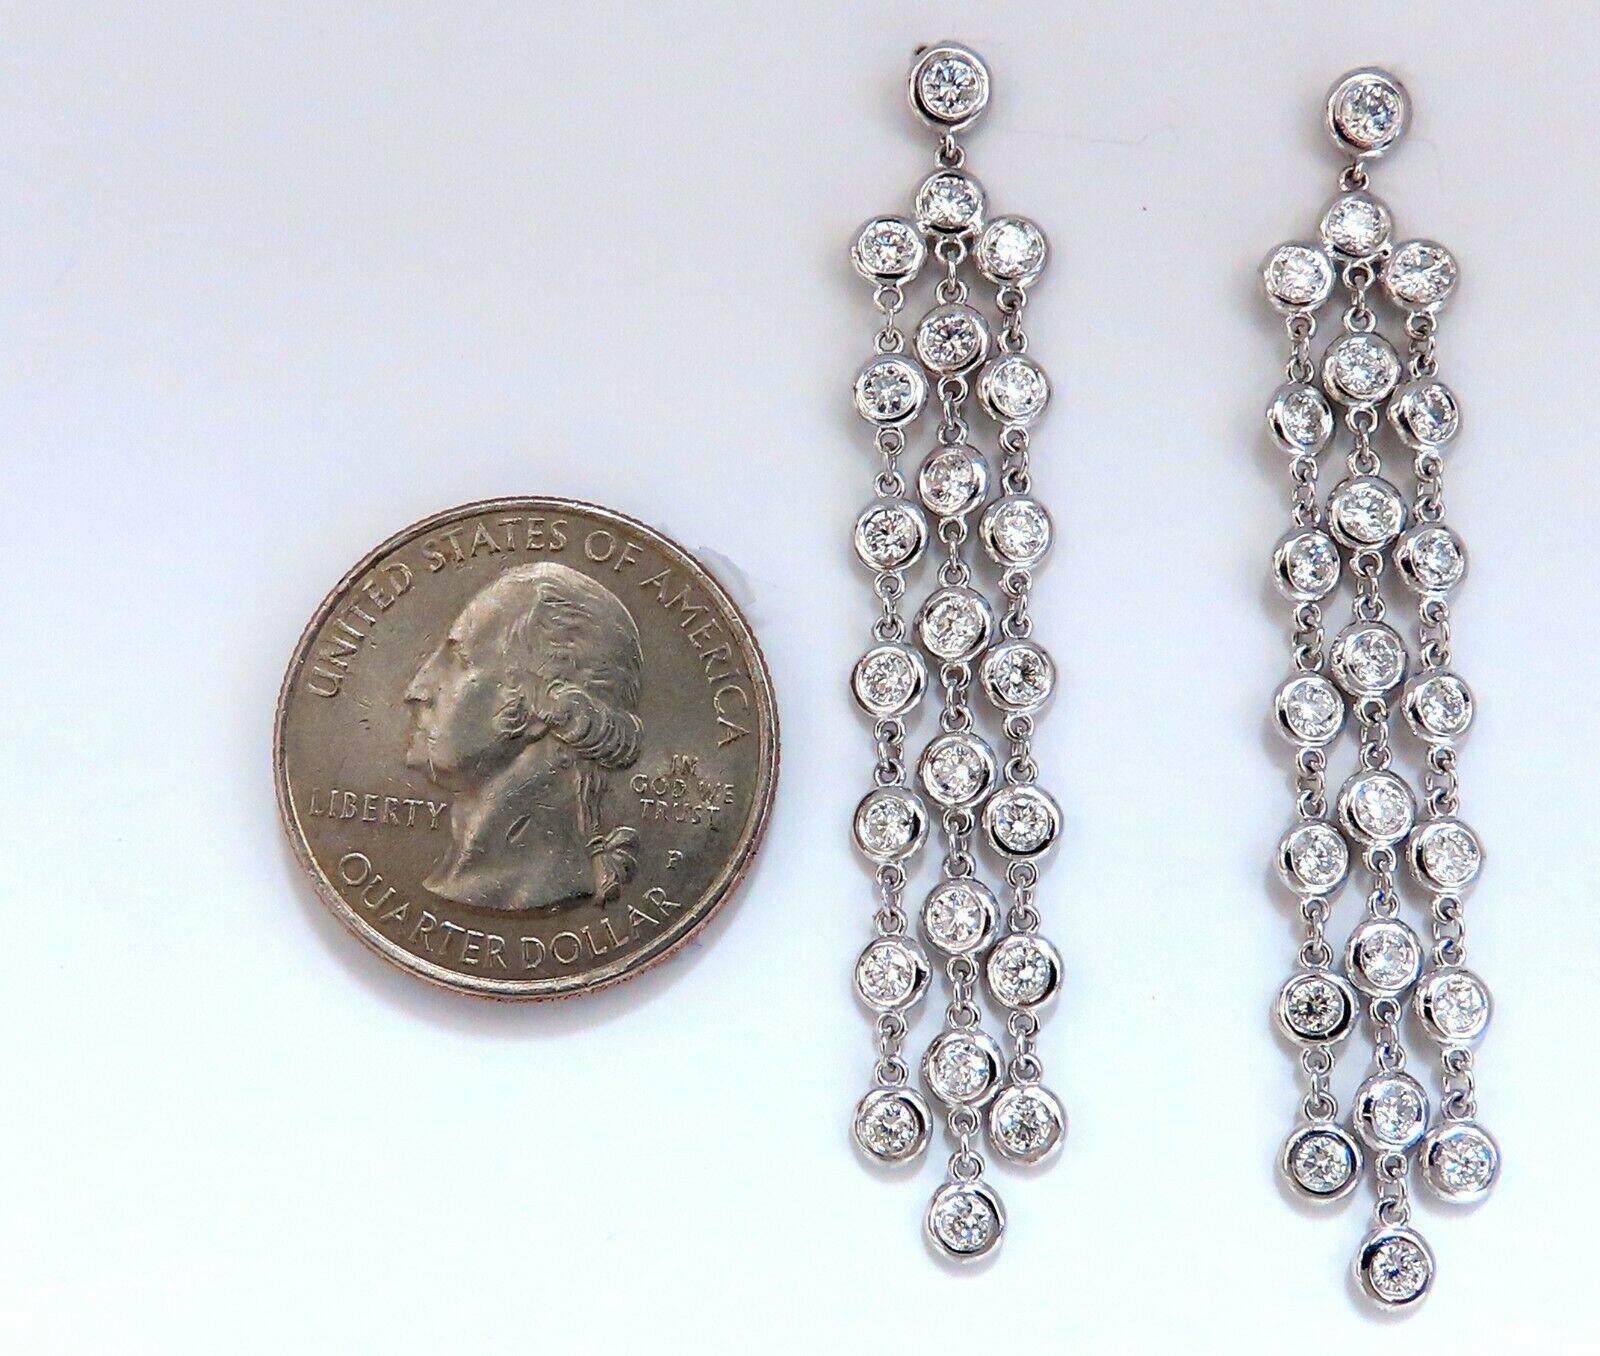 Three Tiered Dangles

2.60ct. Natural diamonds  earrings.

Rounds, Full cut brilliants.

G- color Vs-2 Clarity. 

Excellent detail.

14kt. white gold

7.1 grams.

2.25 inch Long

Butterfly, Comfortable push backs 

$8,000 Appraisal Certificate will